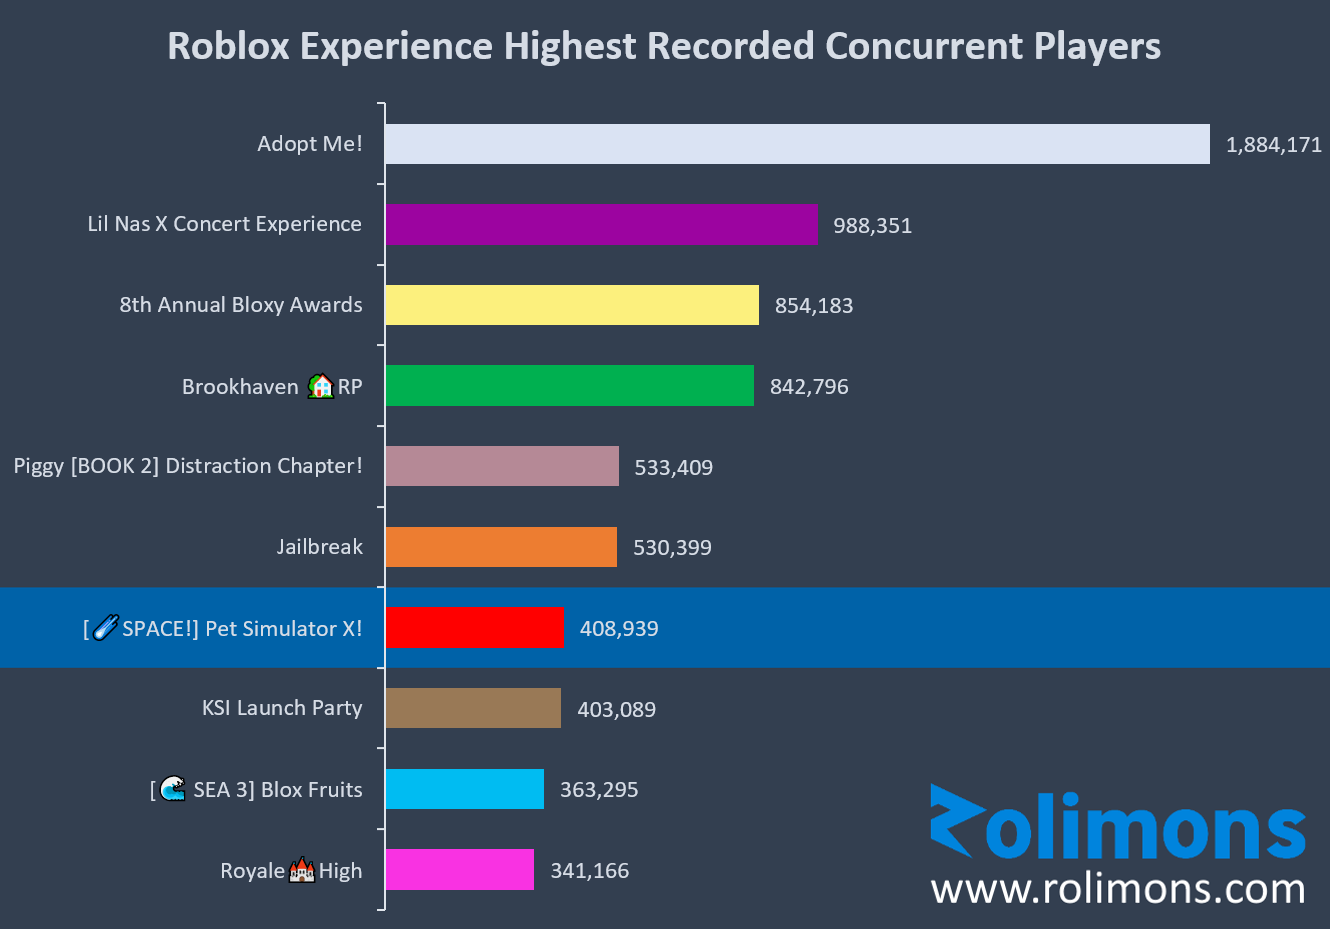 Roblox Trading News  Rolimon's on X: Congratulations to Pet Simulator X  for achieving the highest concurrent player count by a simulator and  entering the top 10 highest concurrent Roblox games ever! @